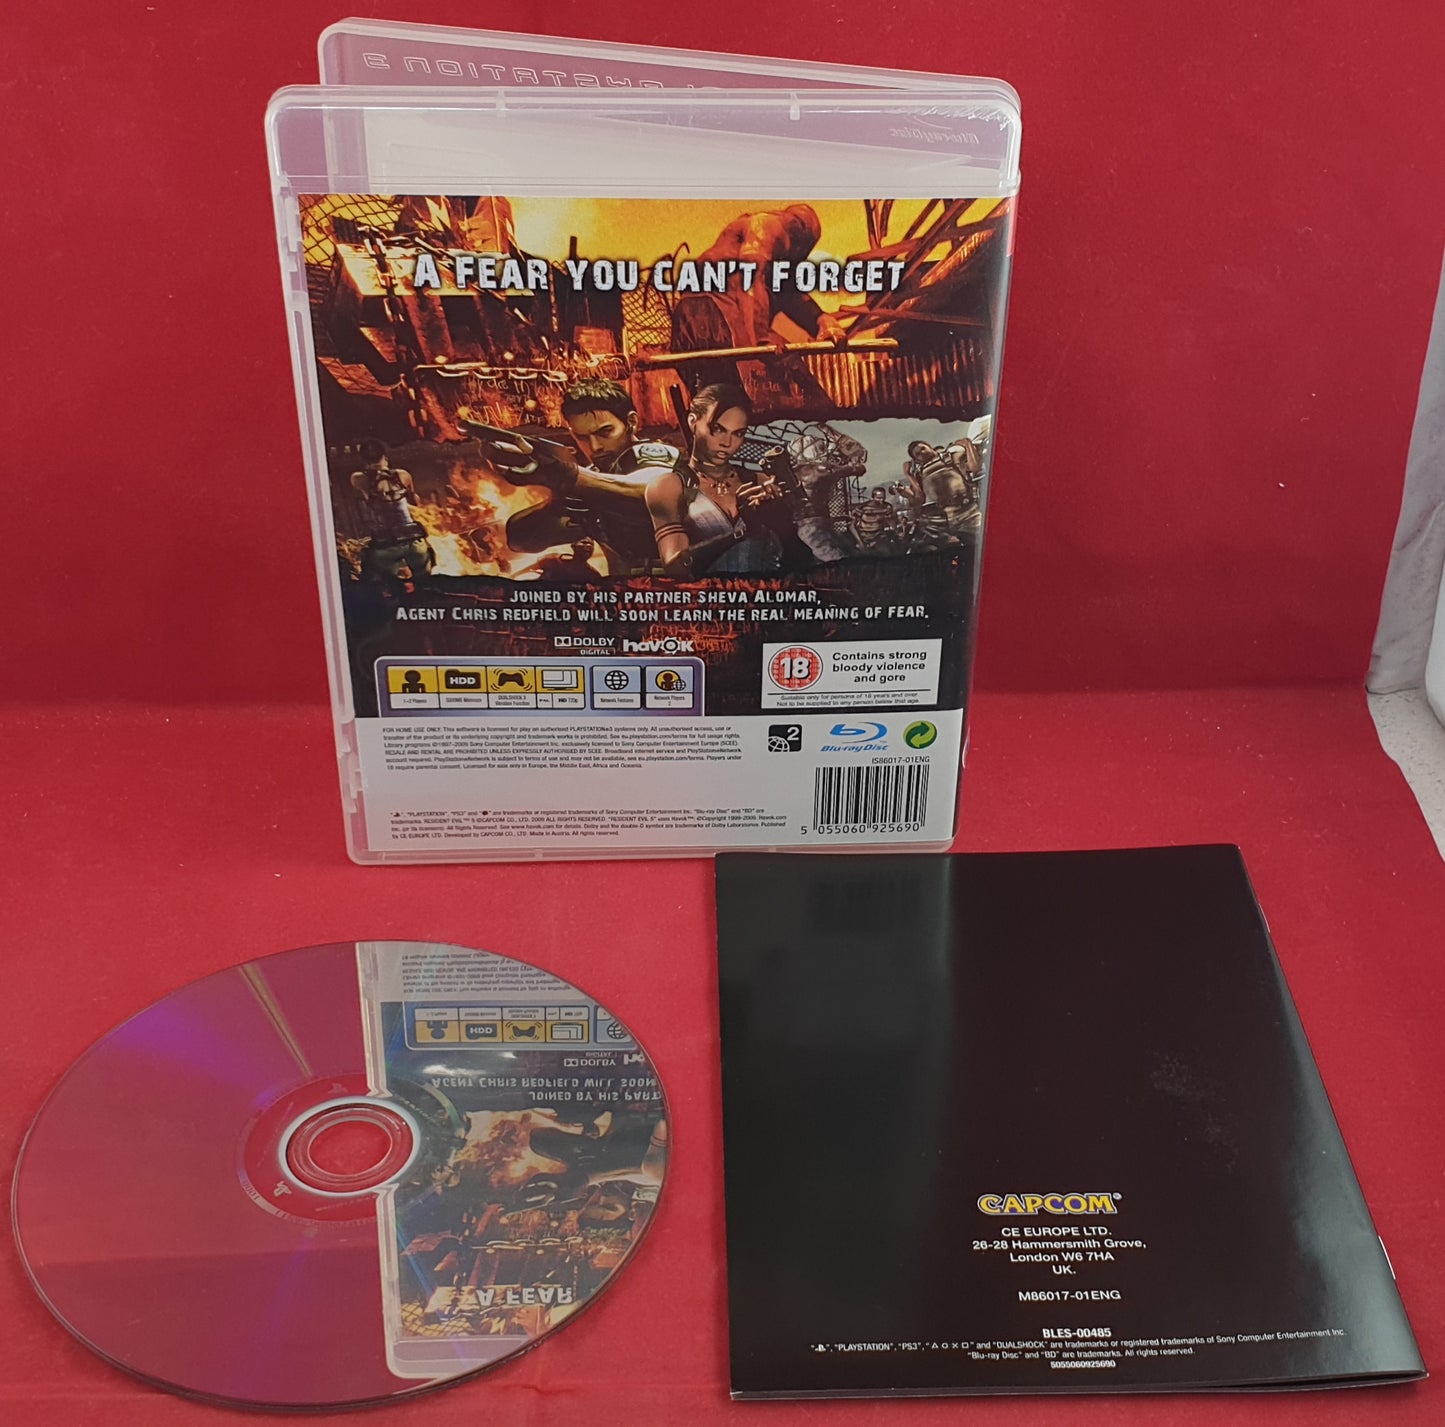 Resident Evil 5 Sony Playstation 3 (PS3) Game